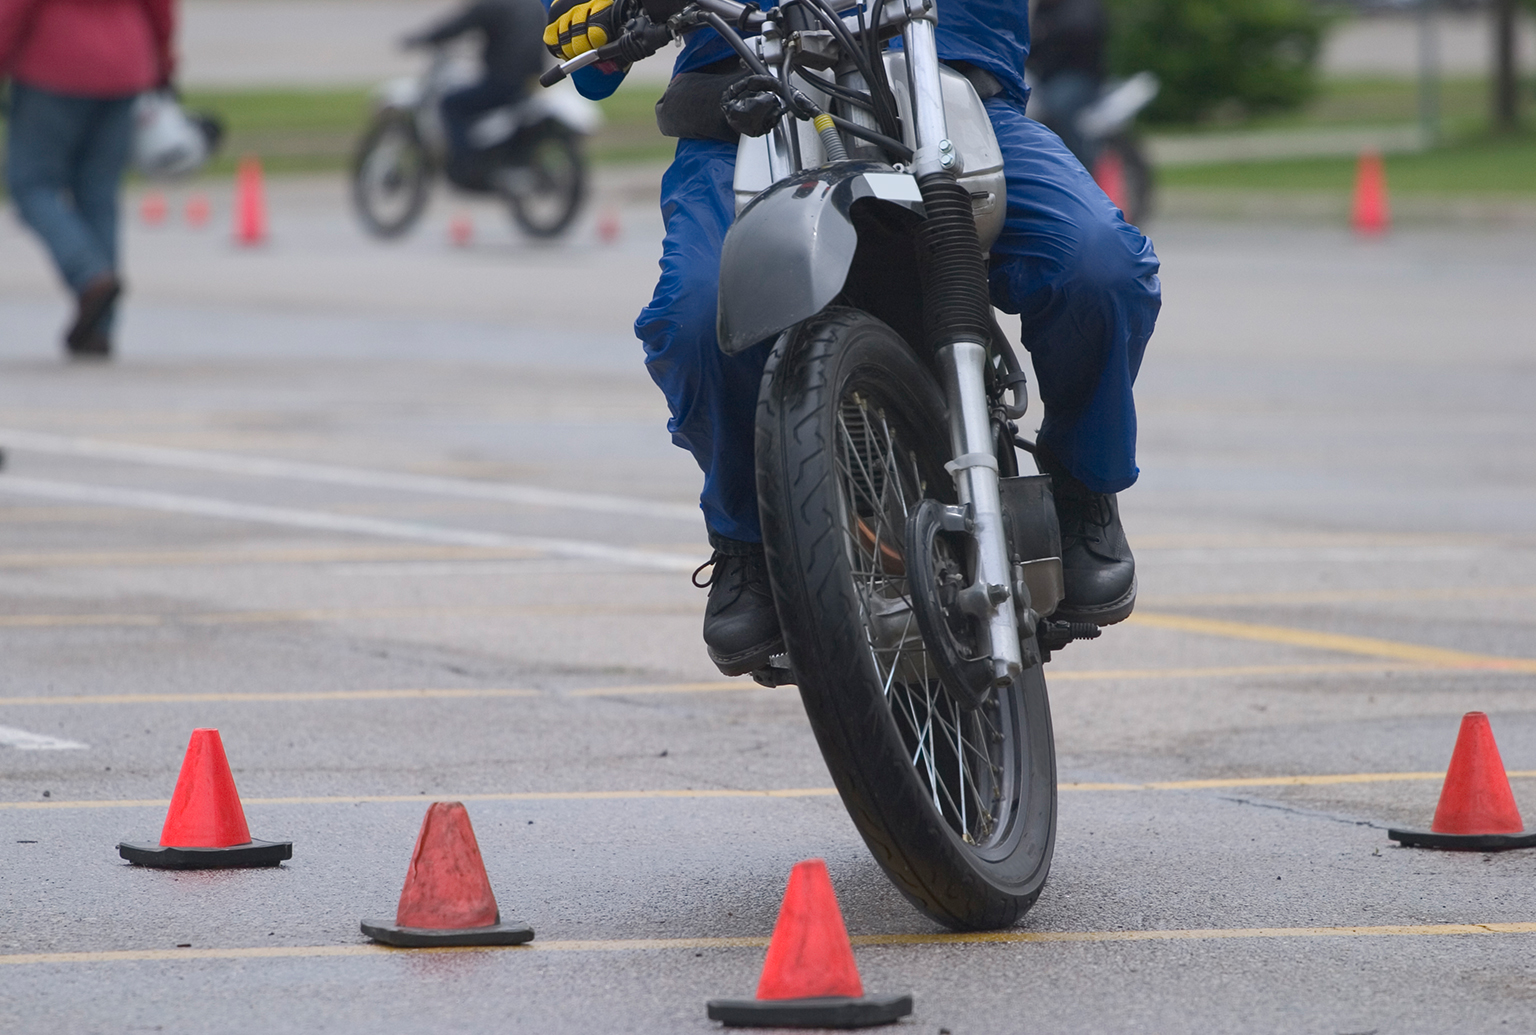 motorcycle rider courses